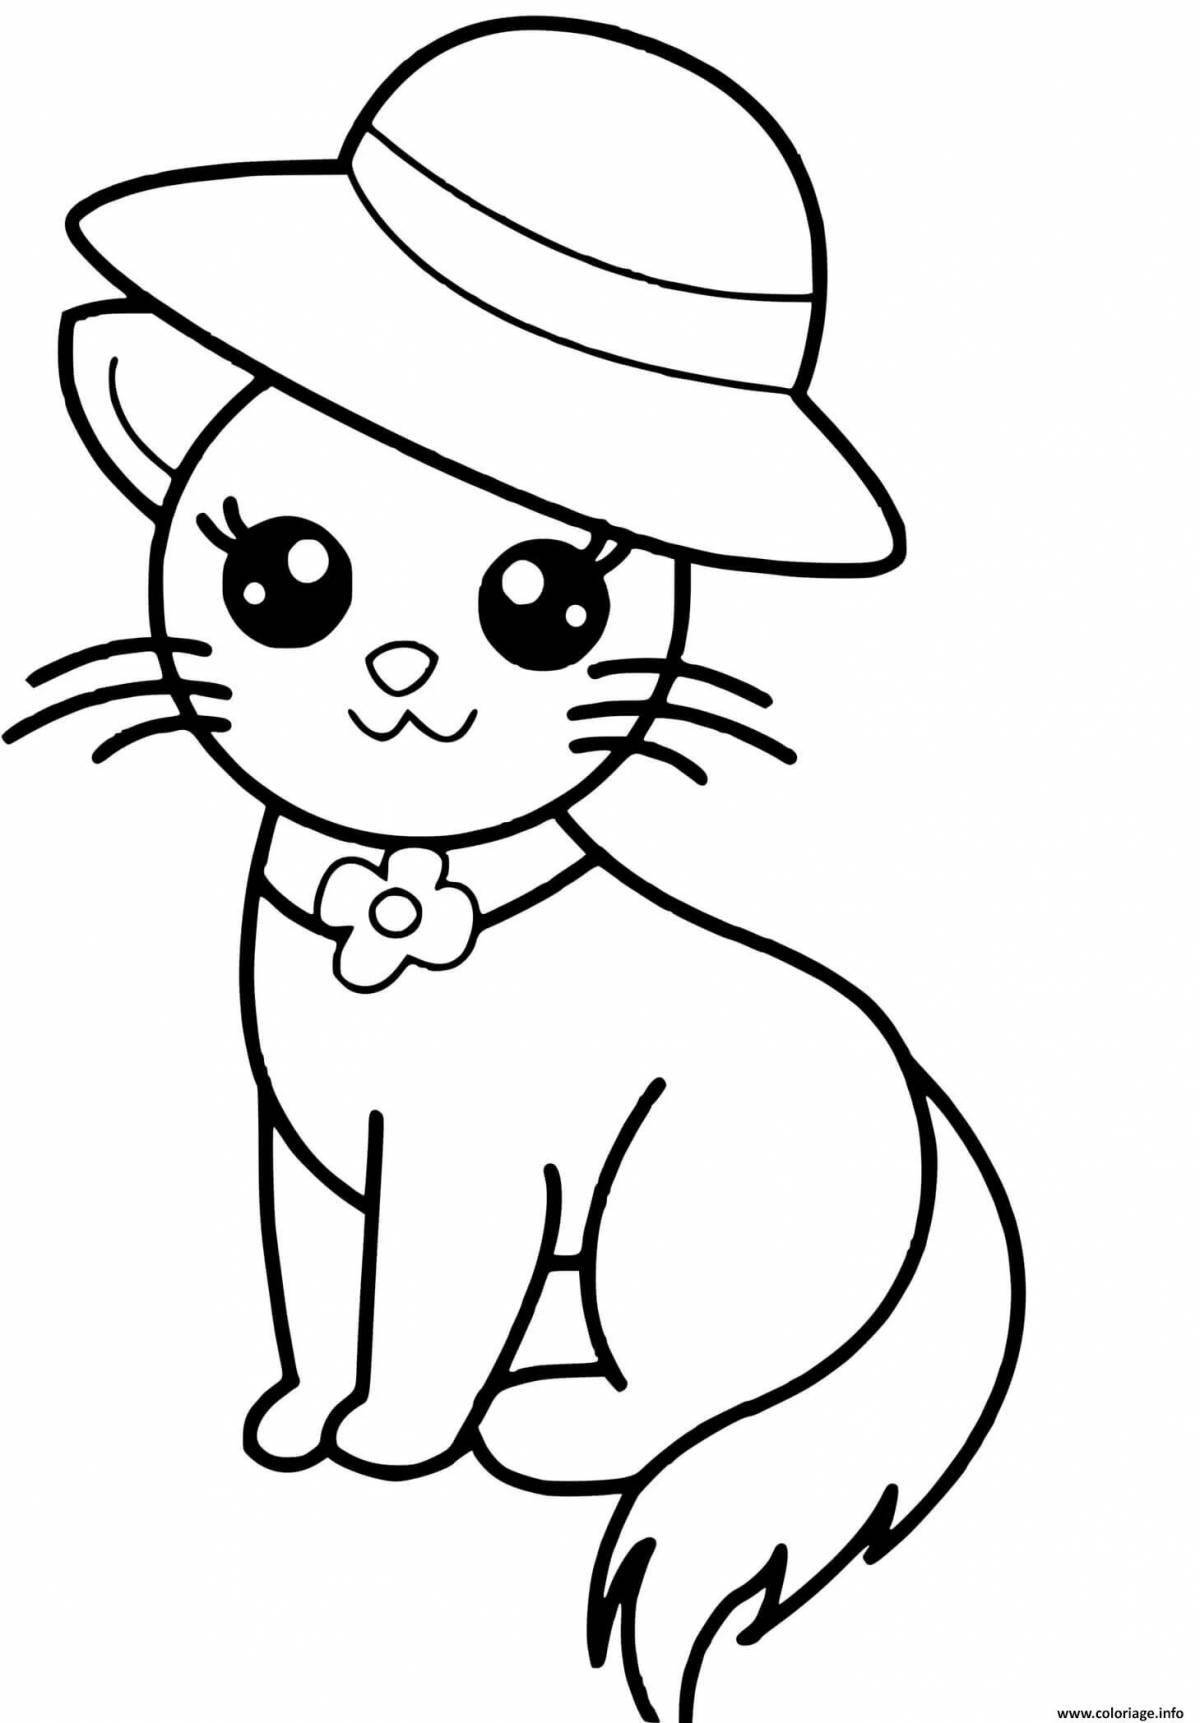 Exquisite kitty coloring book for 5-6 year olds